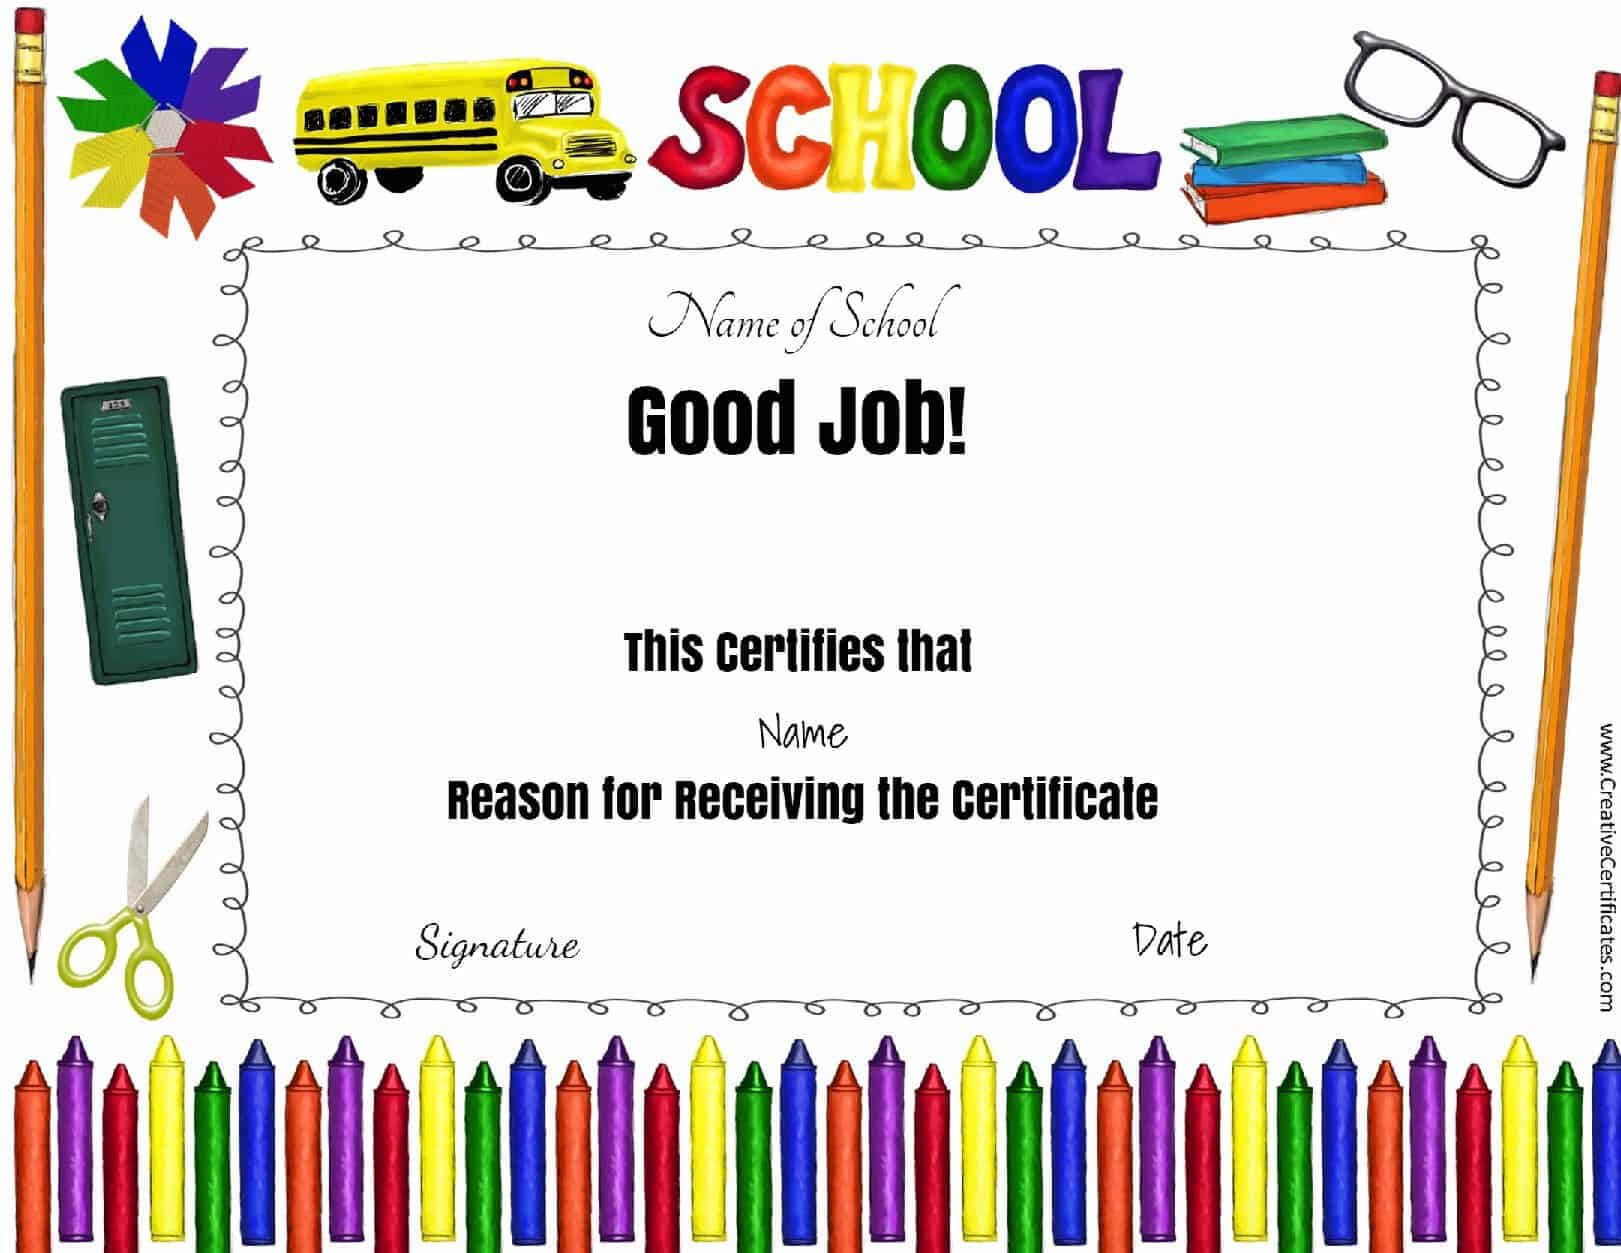 Free School Certificates & Awards With Regard To Classroom Certificates Templates